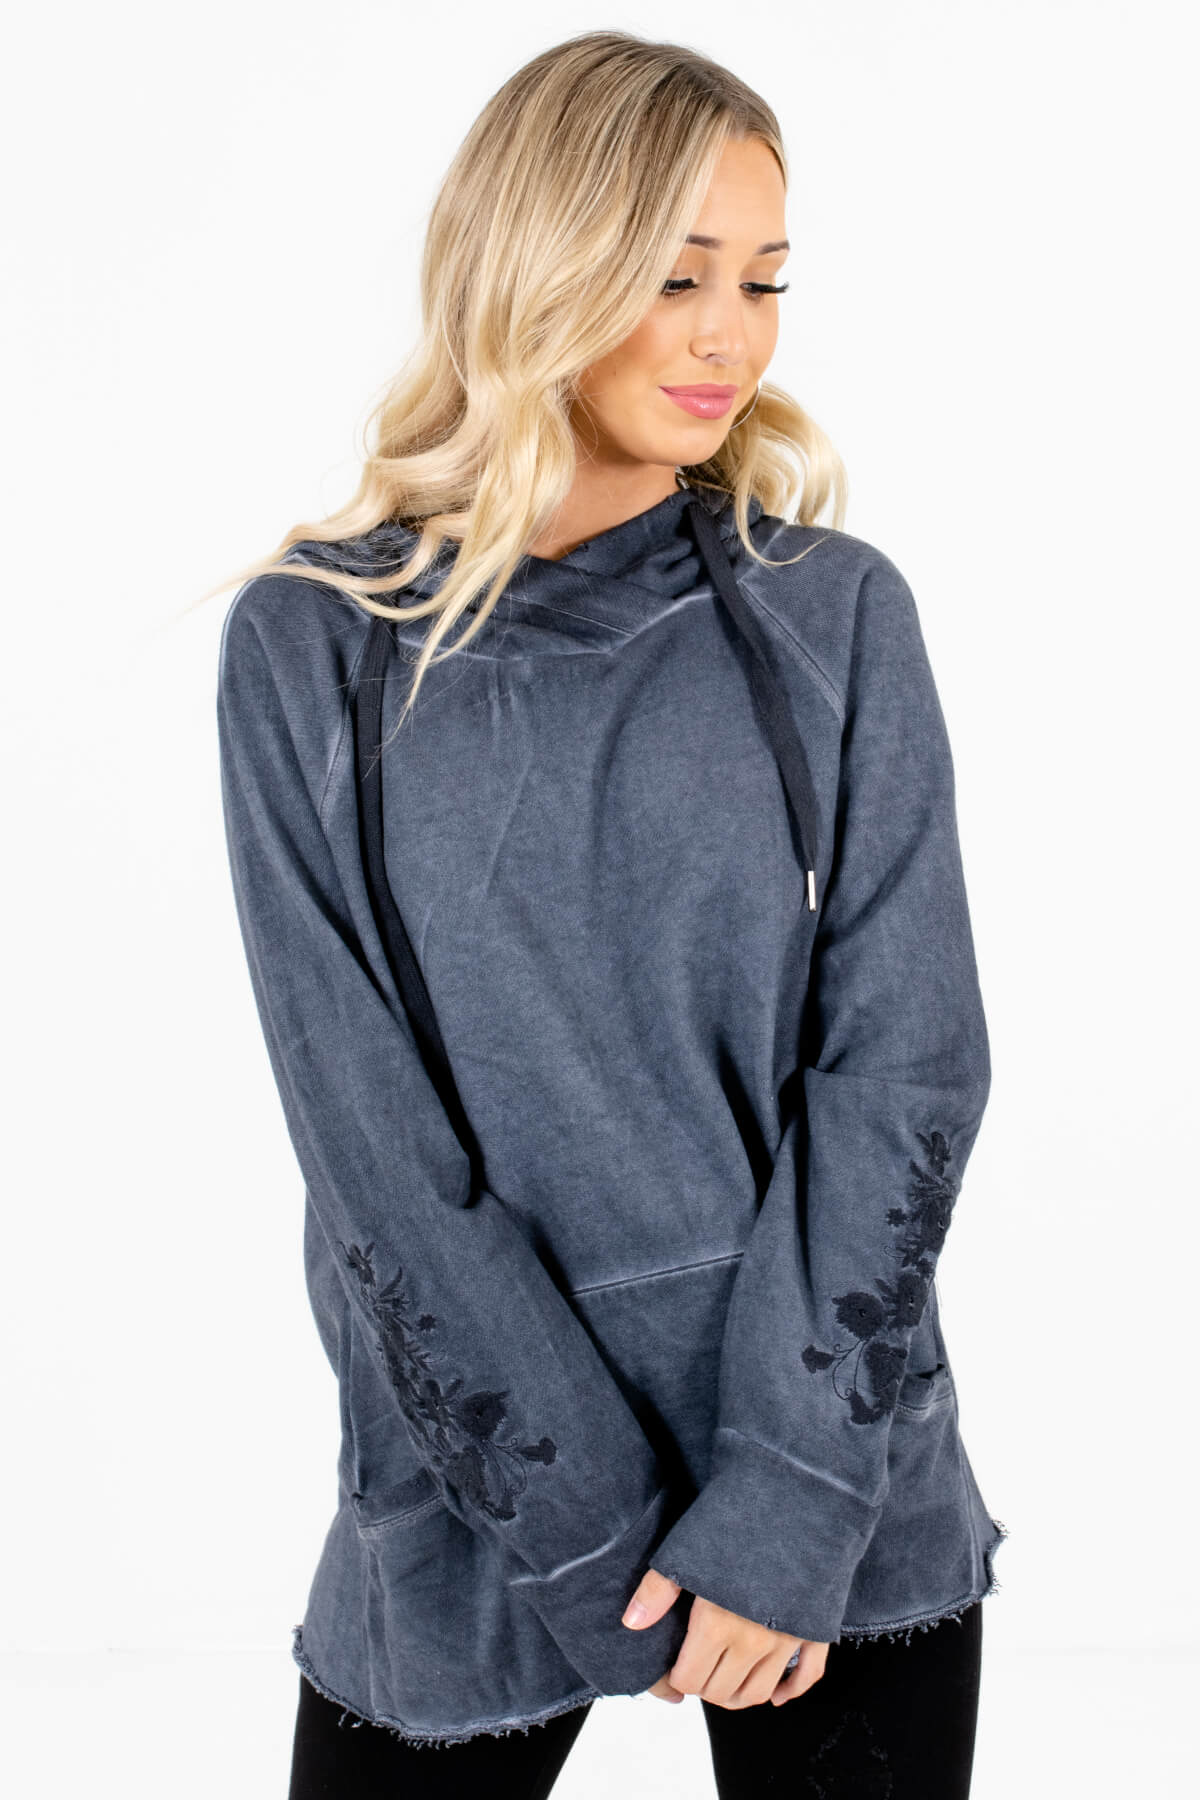 Navy Blue Embroidered Boutique Hoodies for Women